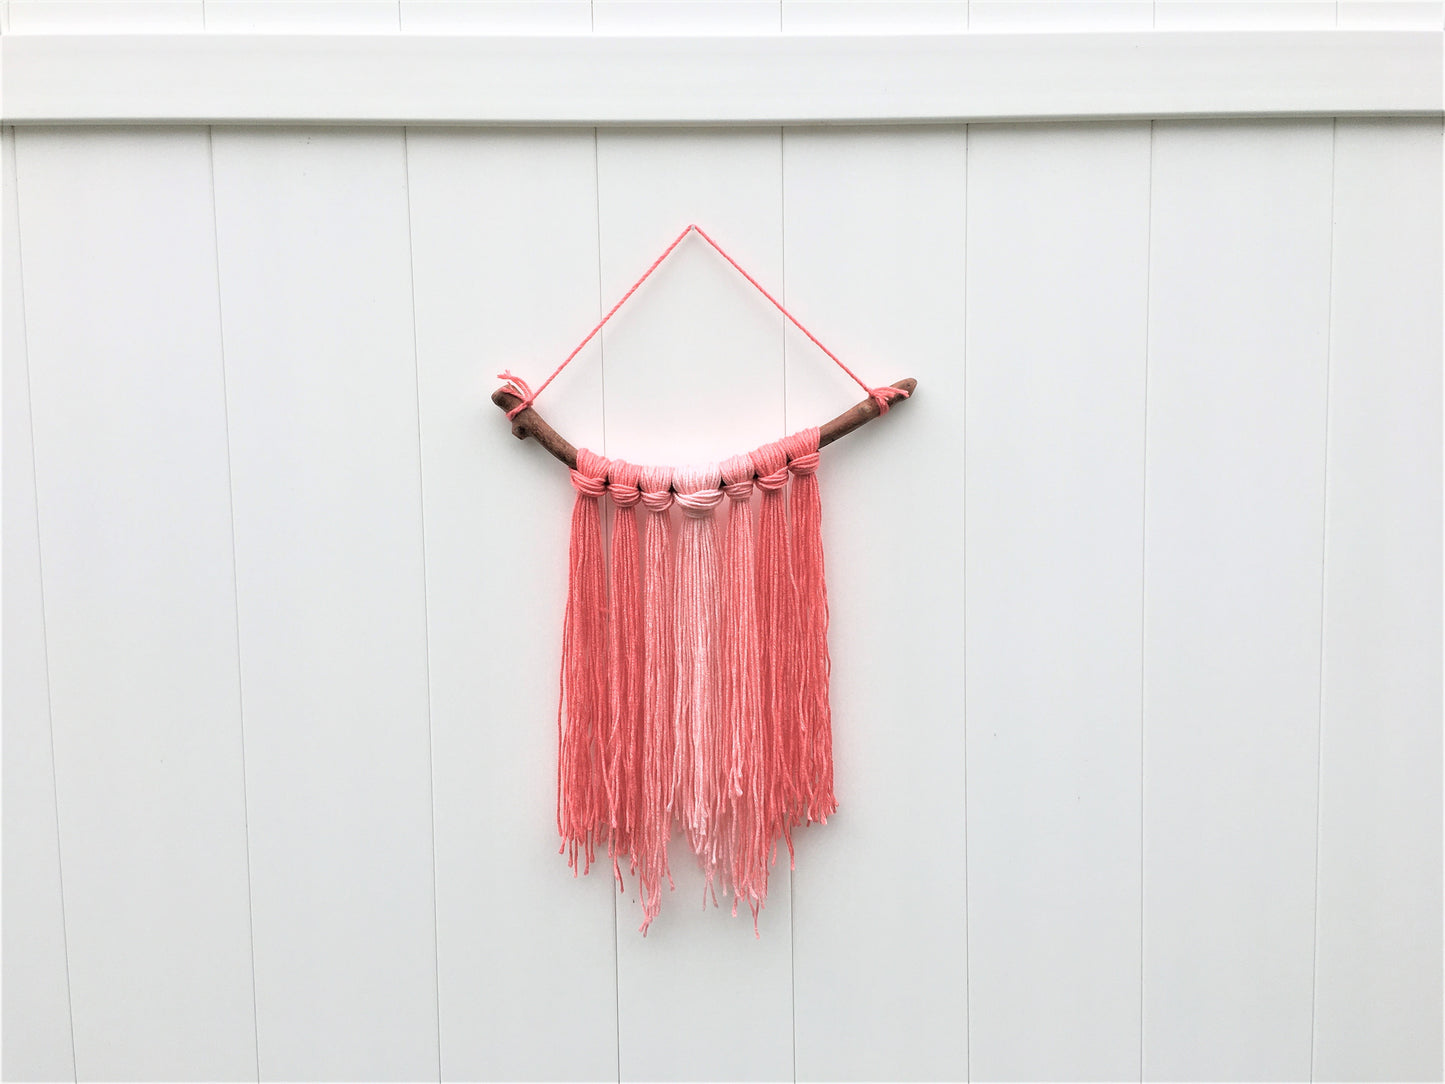 Yarn Wall hanging 1 - Chunky coral hombre (dark outside to light inside) w/live oak branch